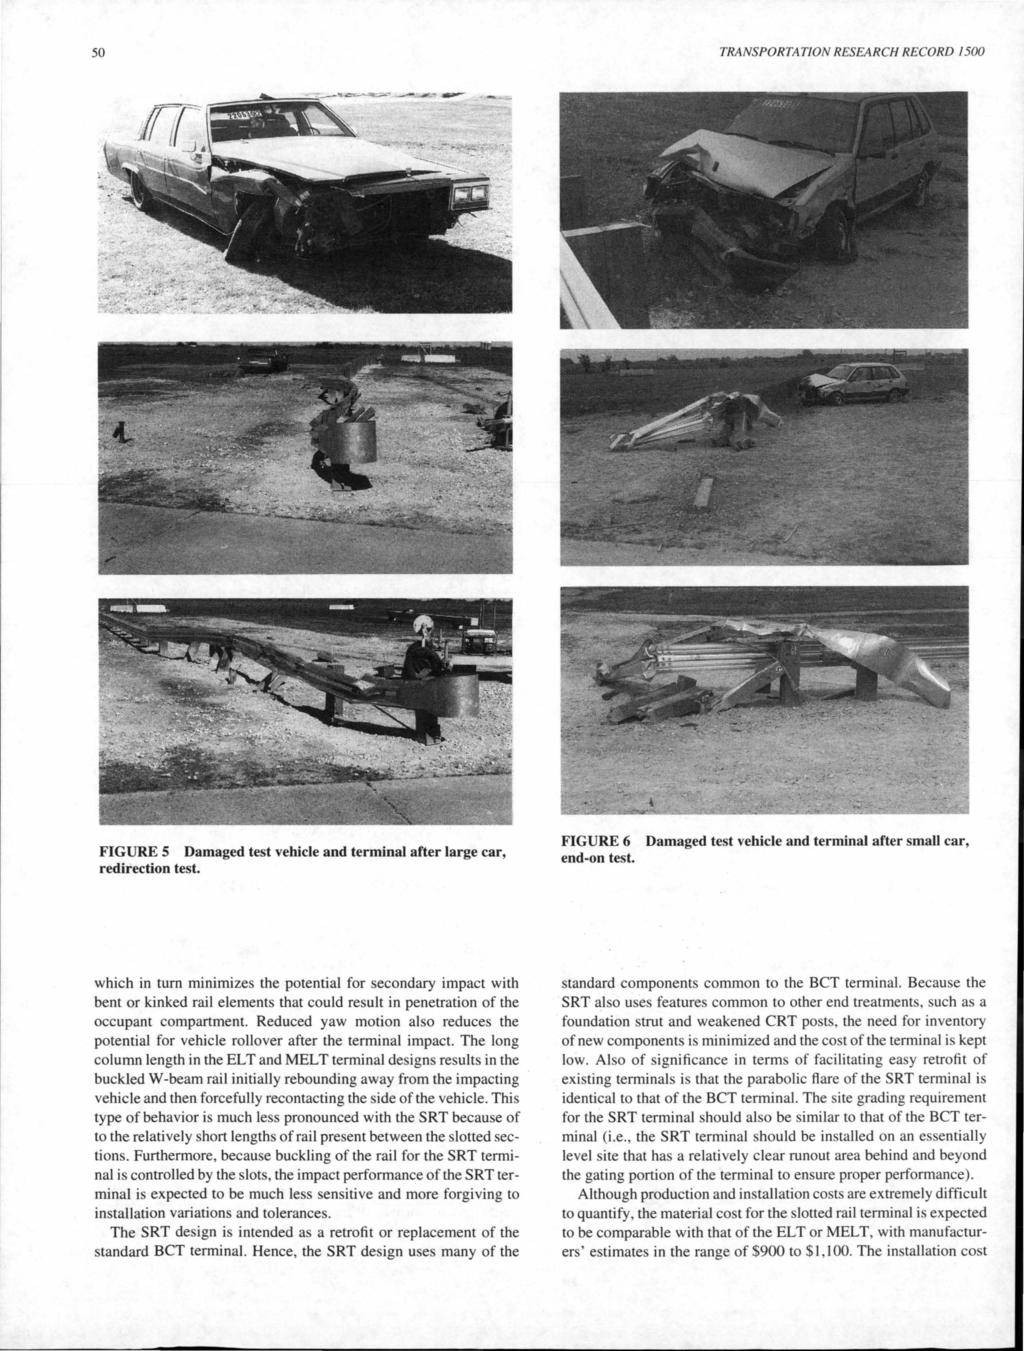 50 FIGURE 5 Damaged test vehicle and terminal after large car, redirection test.